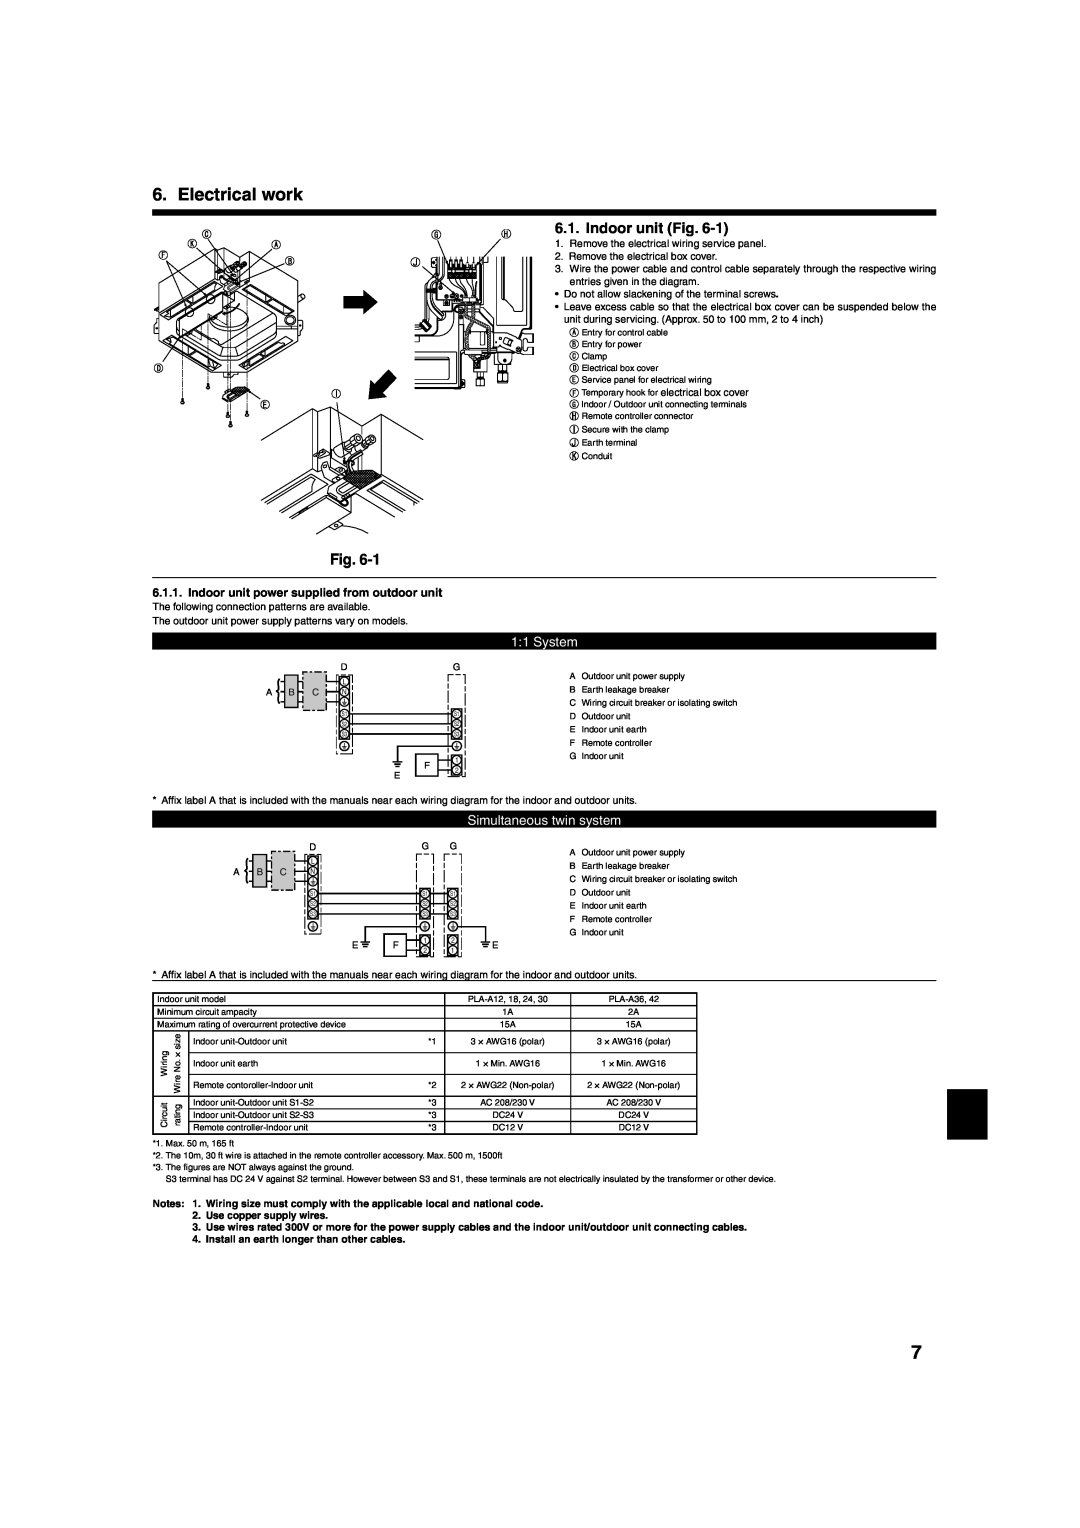 Mitsumi electronic PLA-ABA installation manual Electrical work, Indoor unit Fig, 1 1 System, Simultaneous twin system 